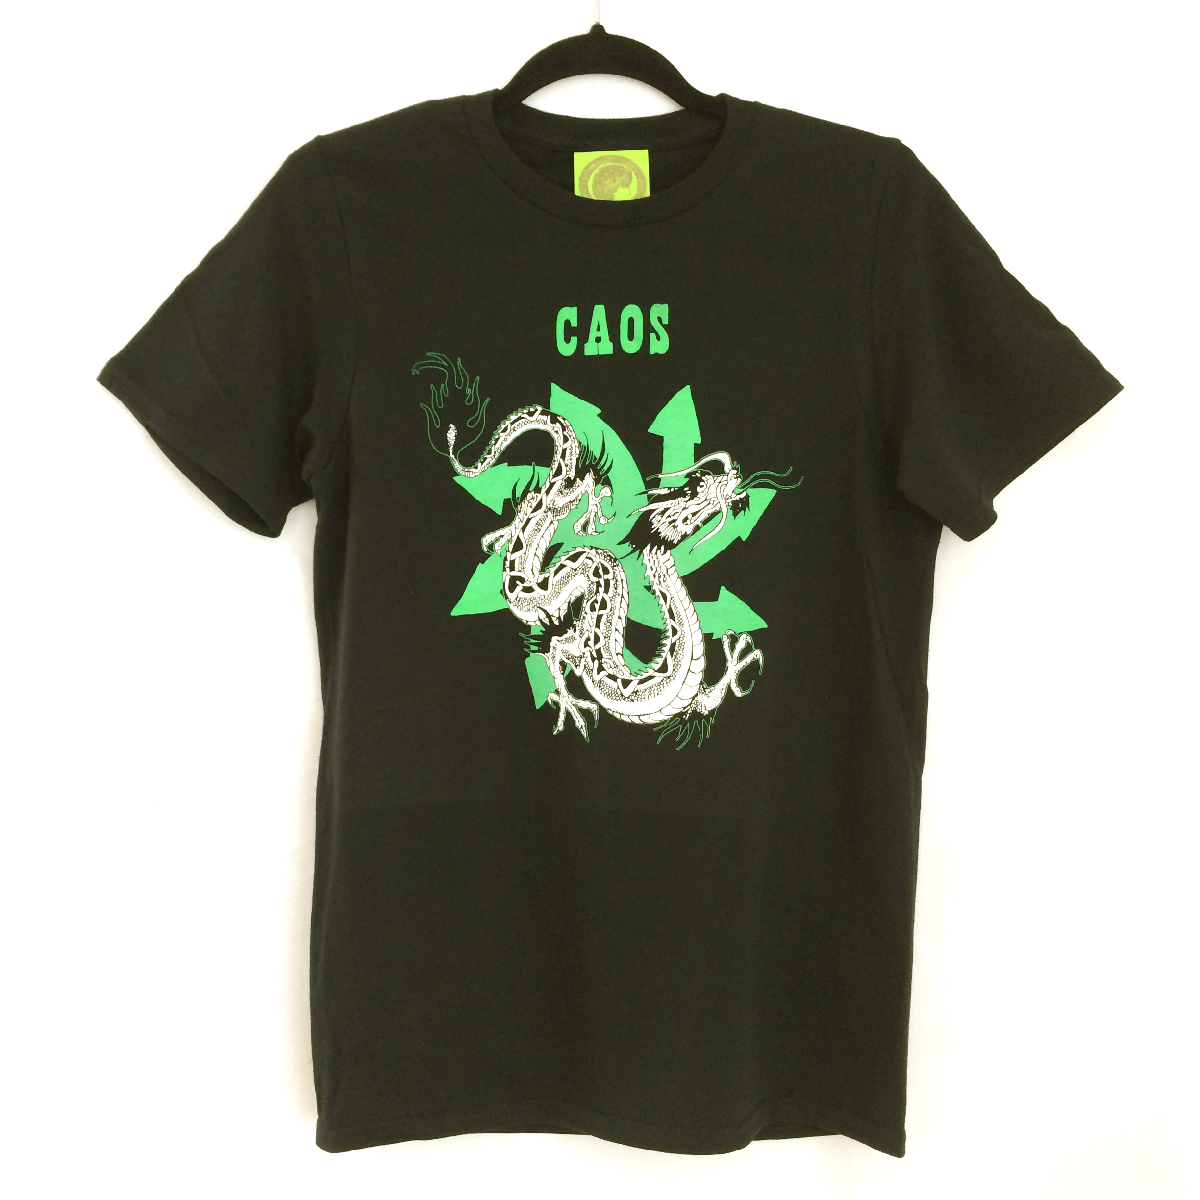 CAOS T-shirt – Shirts, Paper and Music made in Ciudad de Mexico, Mexico